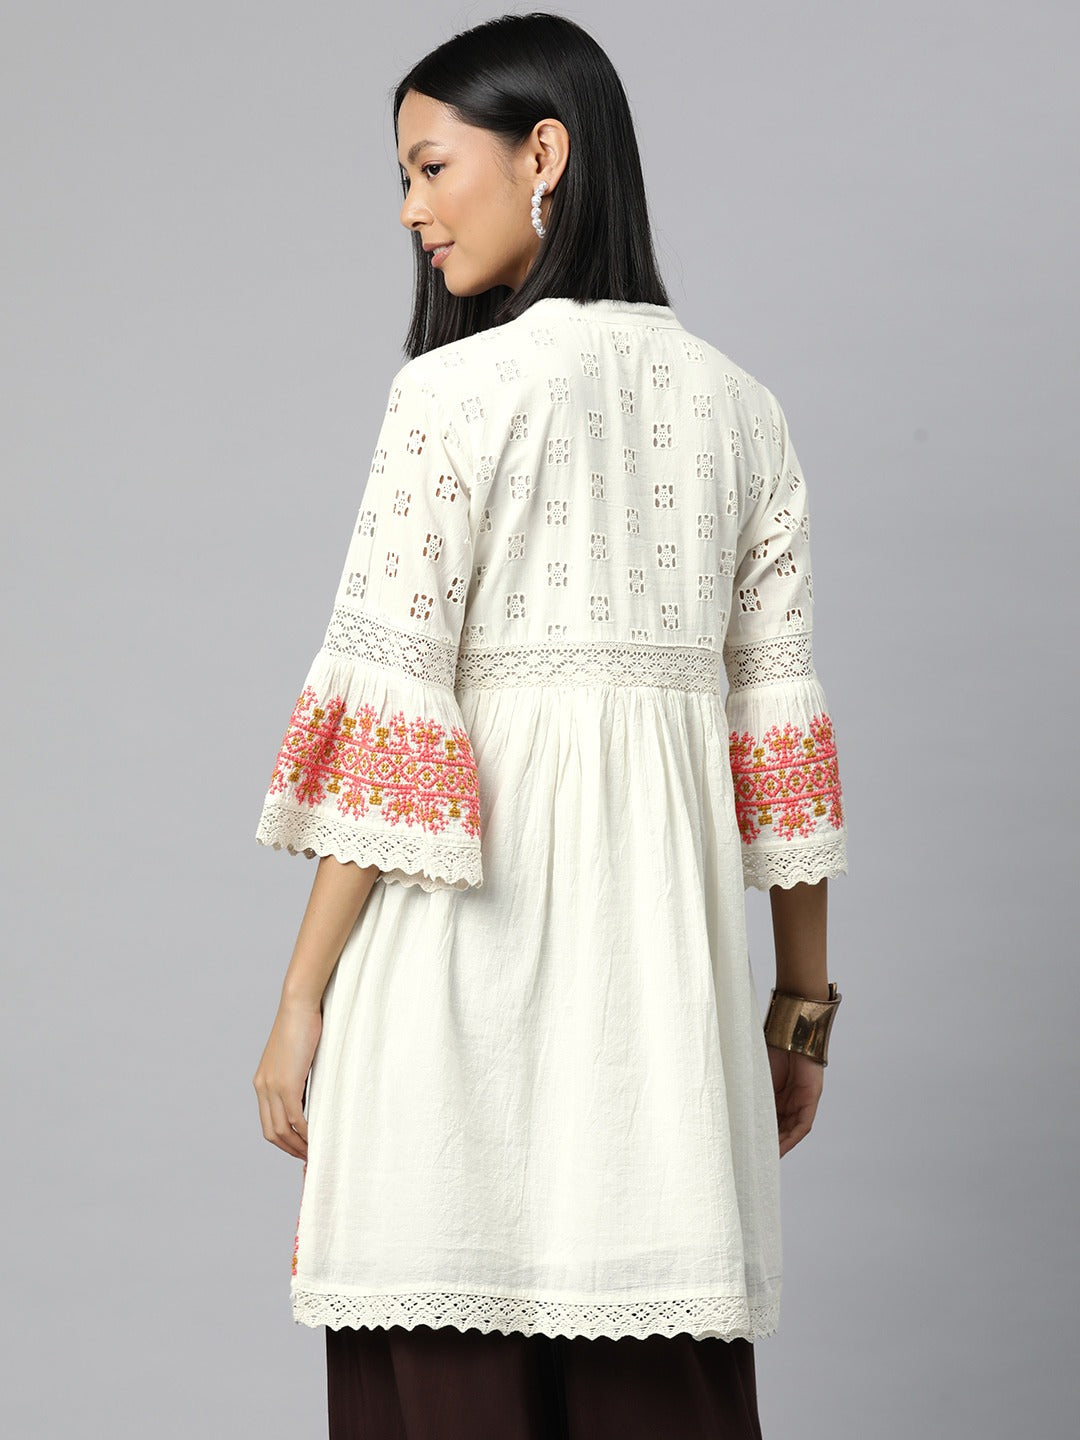 Frock Style Cotton Fabric White Color Kurti